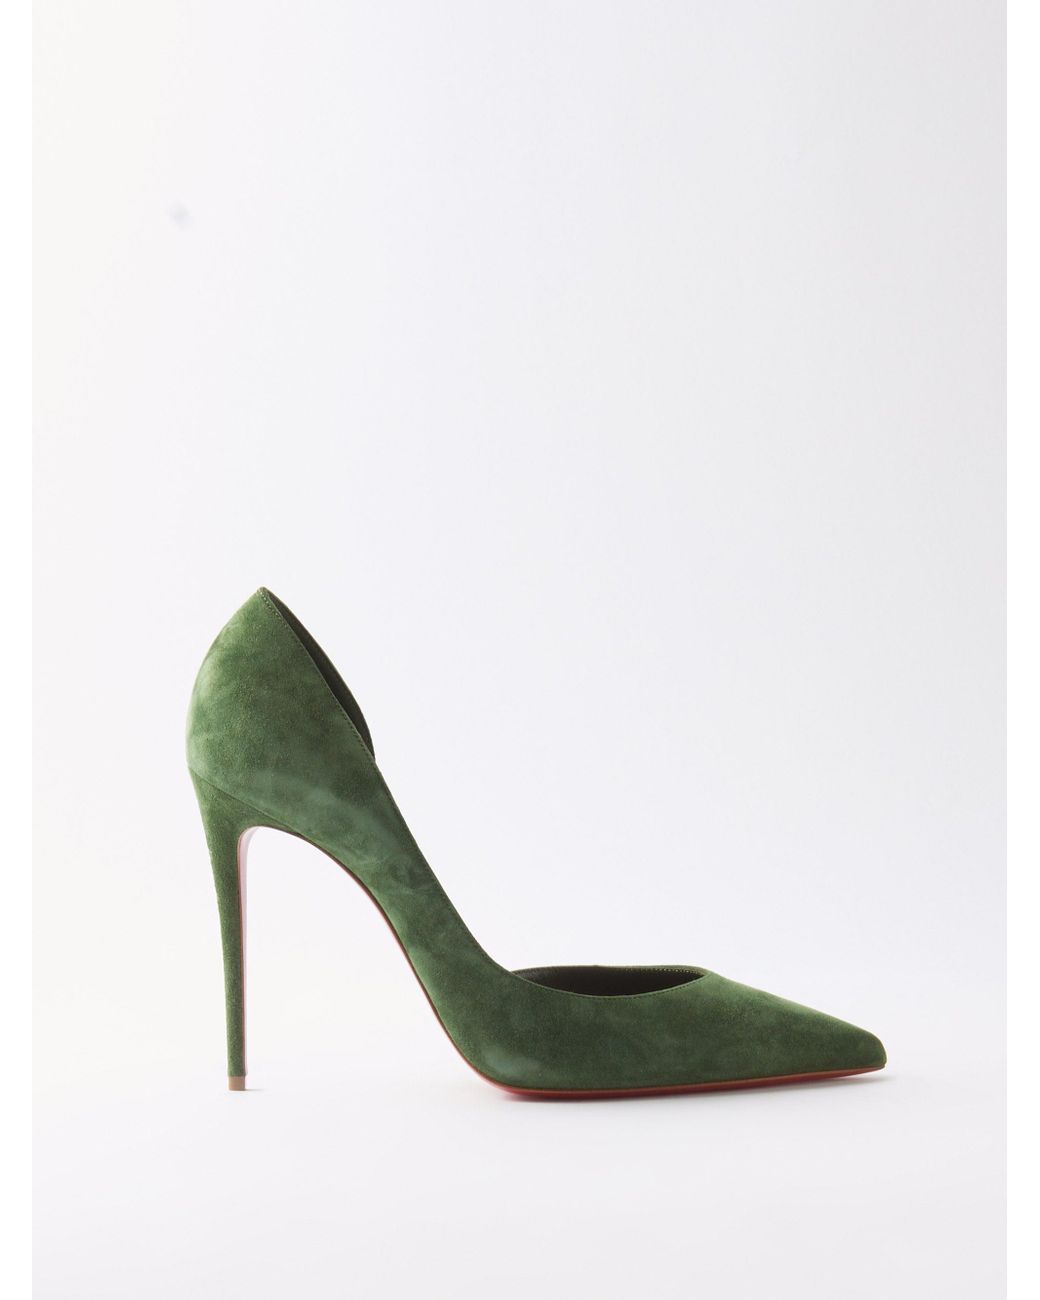 Christian Louboutin Iriza 100 Suede D'orsay Pumps in Green | Lyst